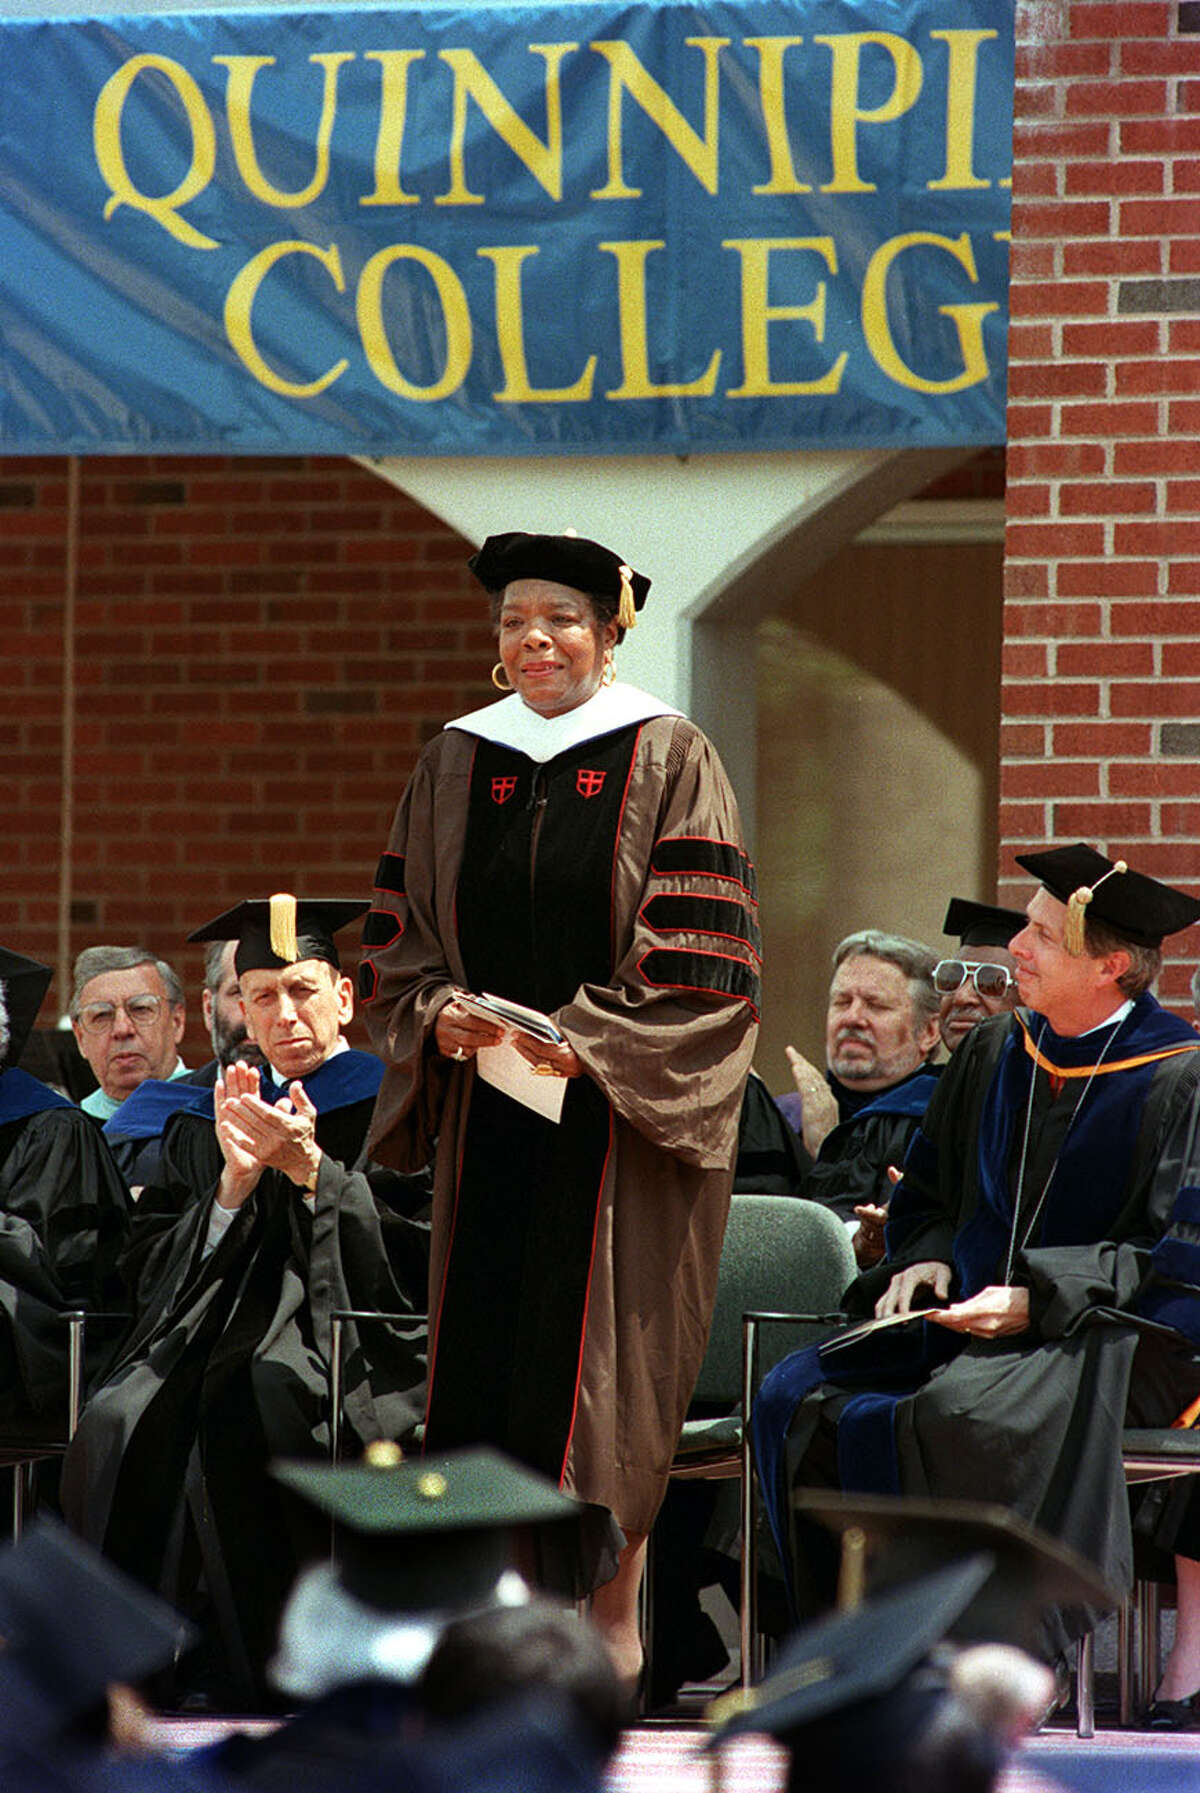 by PETER R. HVIZDAK---------5/19/96 HAMDEN: Quinnipiac College Honorary Degree recipient and Maya Angelou , after giving the commencement address at Quinnipiac College graduation Sunday . SEE ATTACHED.